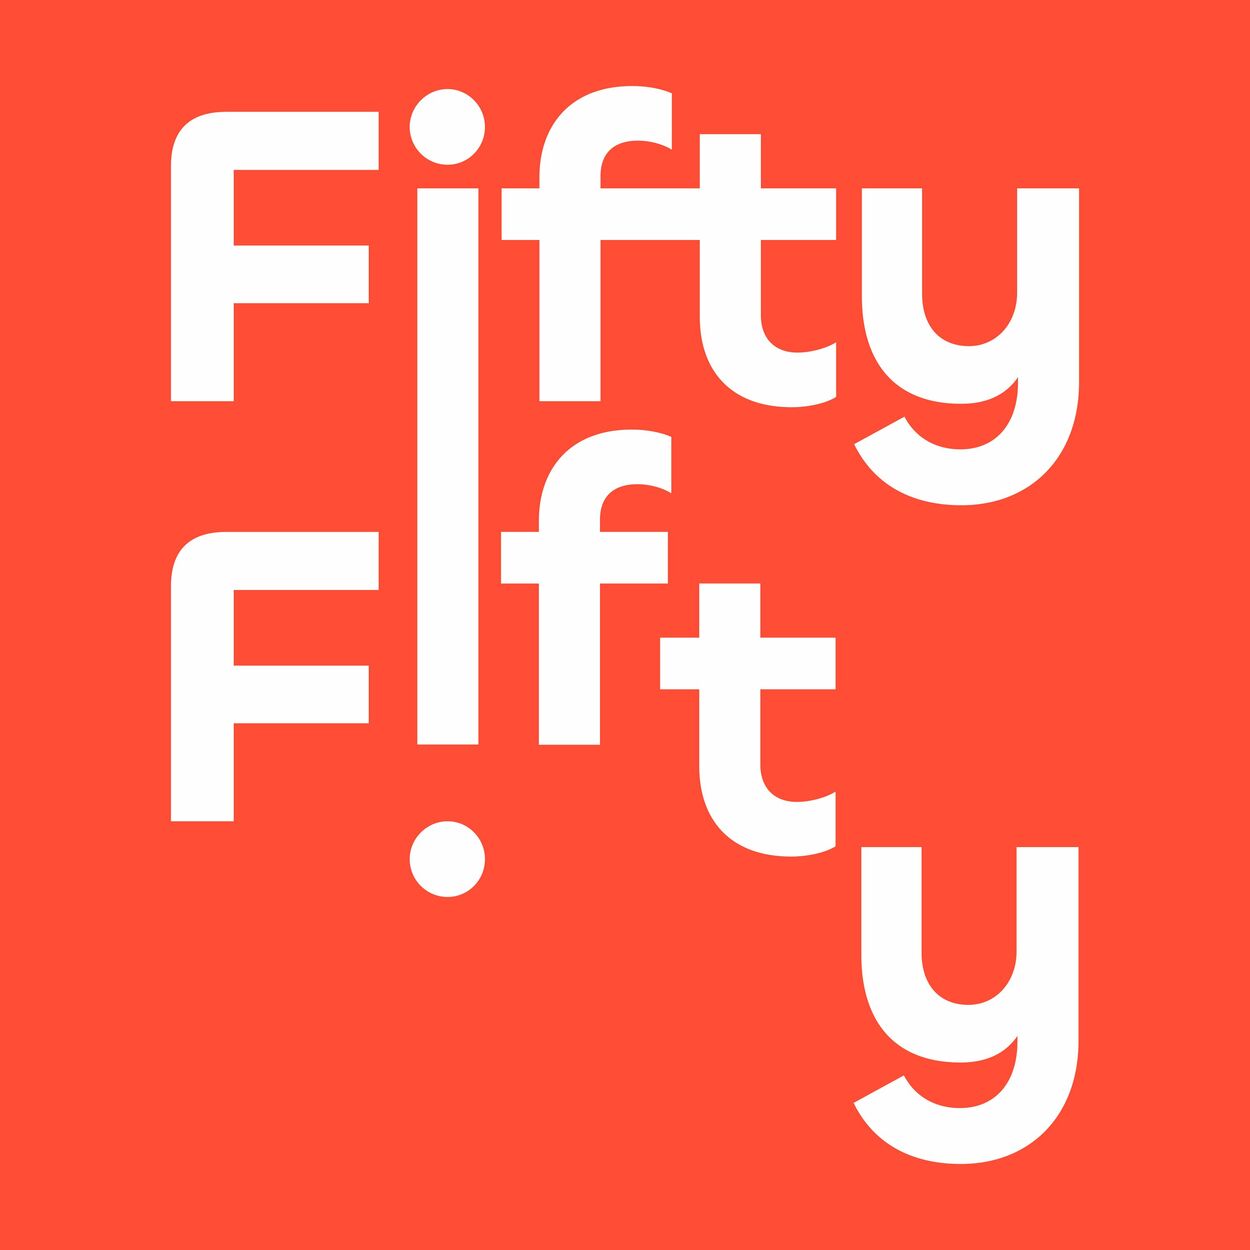 FIFTY FIFTY – The Beginning